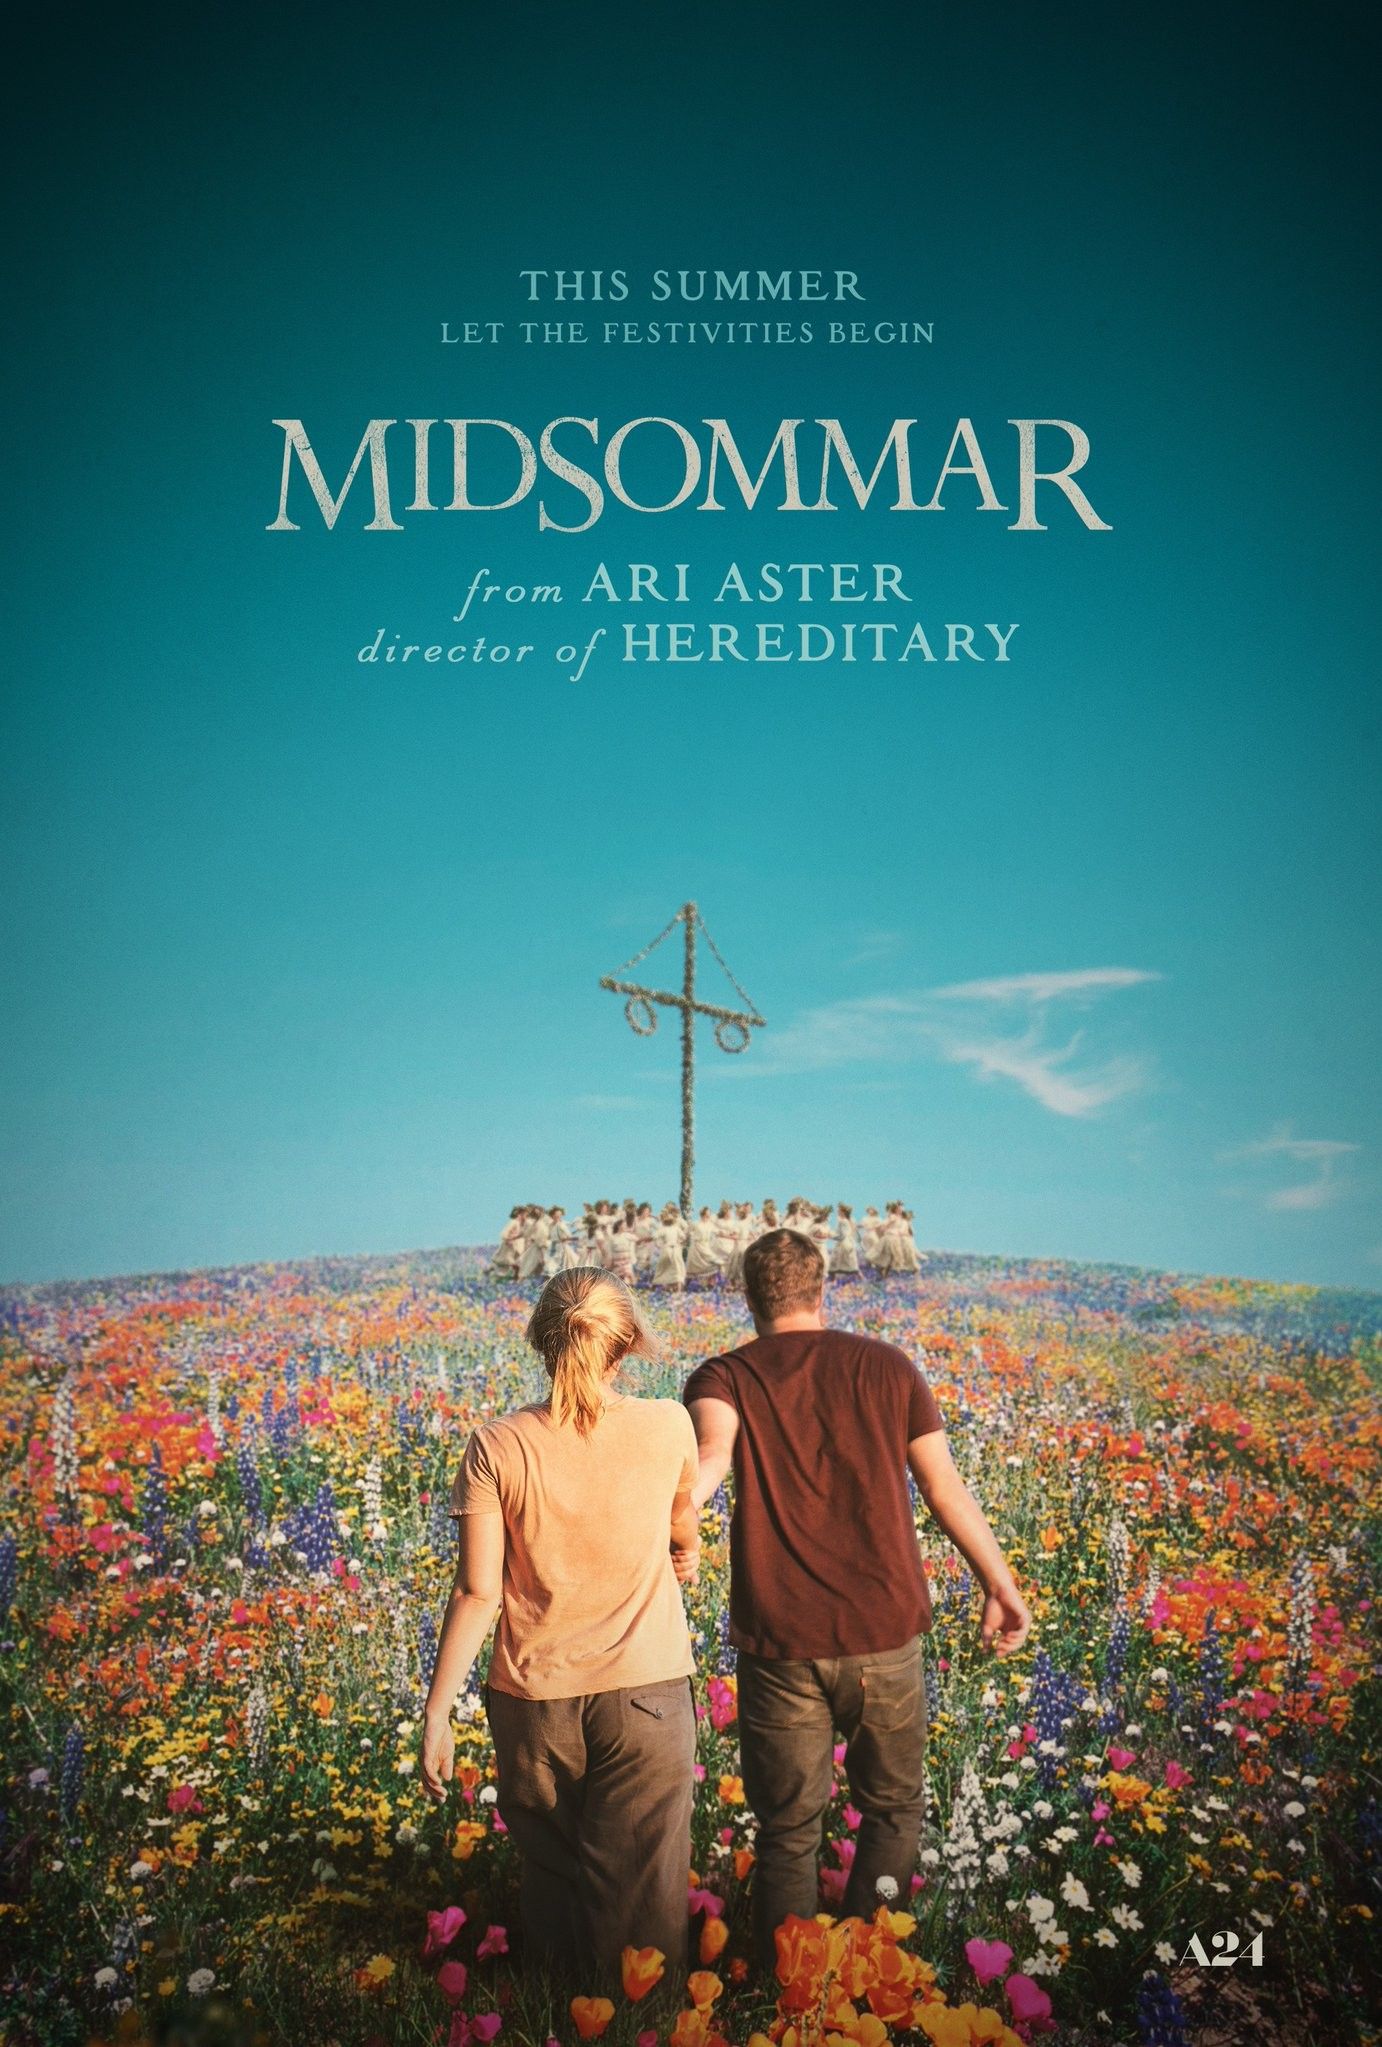 Midsommar Poster Teases Ari Aster’s Followup to Hereditary